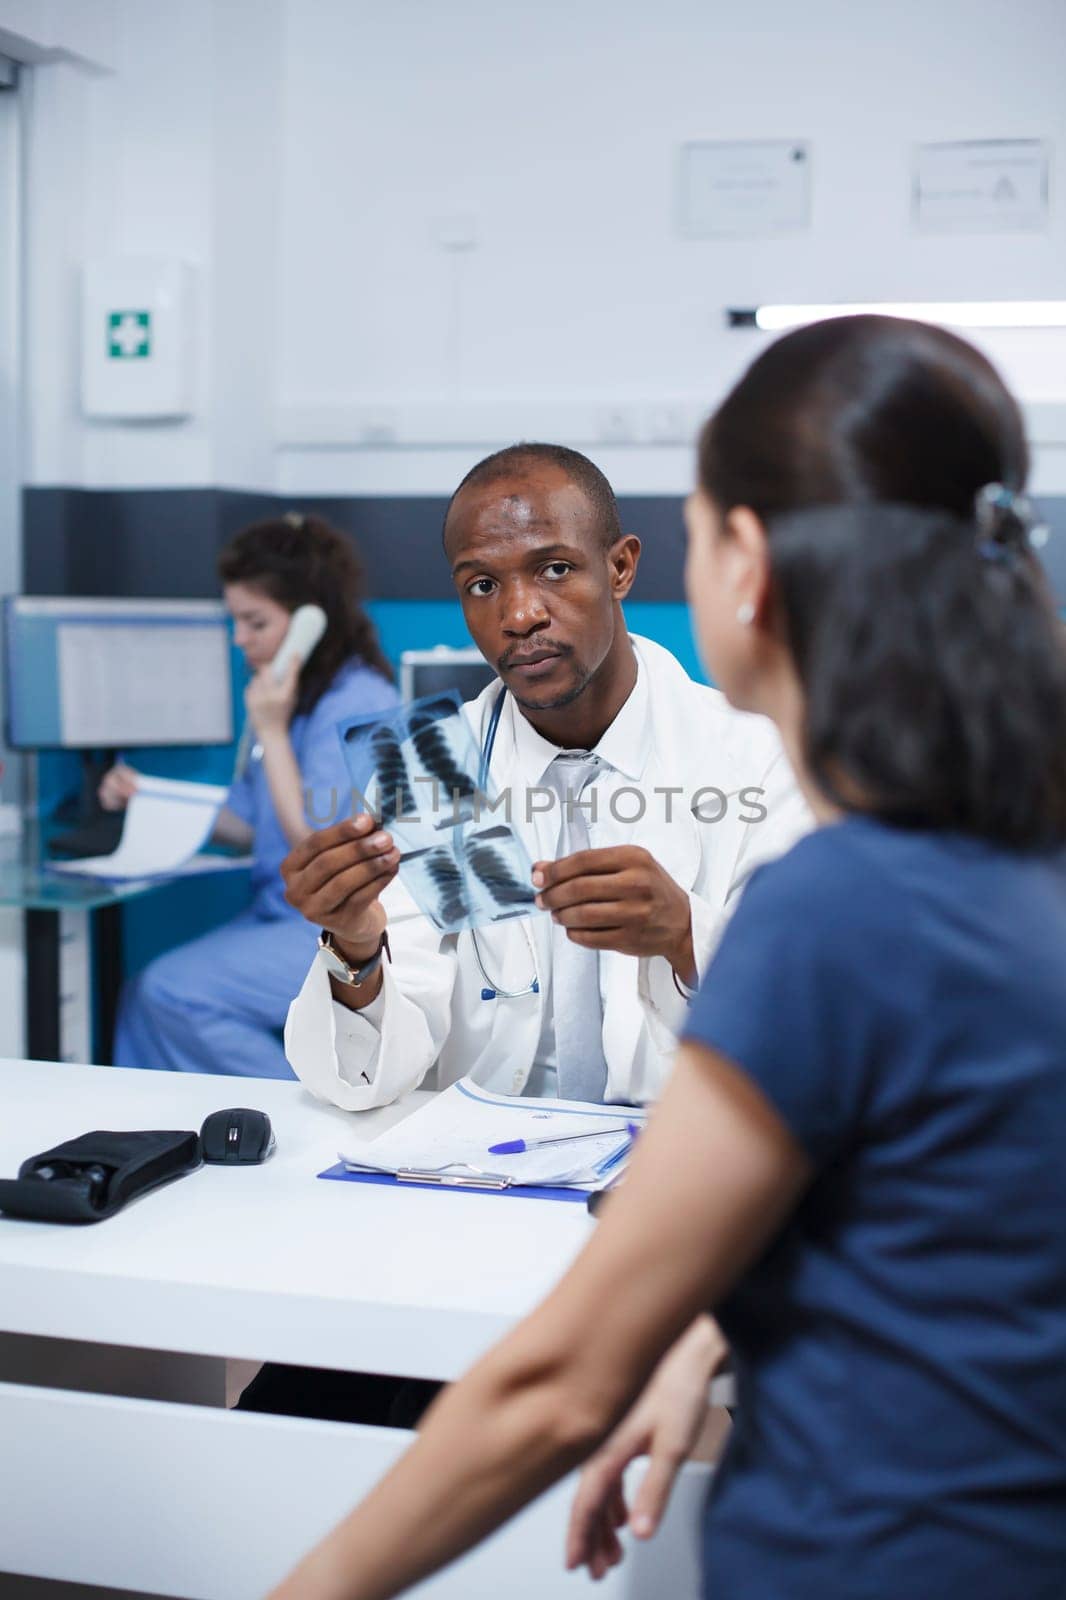 African American female specialist reviewing x-ray image and analyzing imaging results. Radiology expert examines radiography scan and provides diagnostic results to caucasian woman patient.